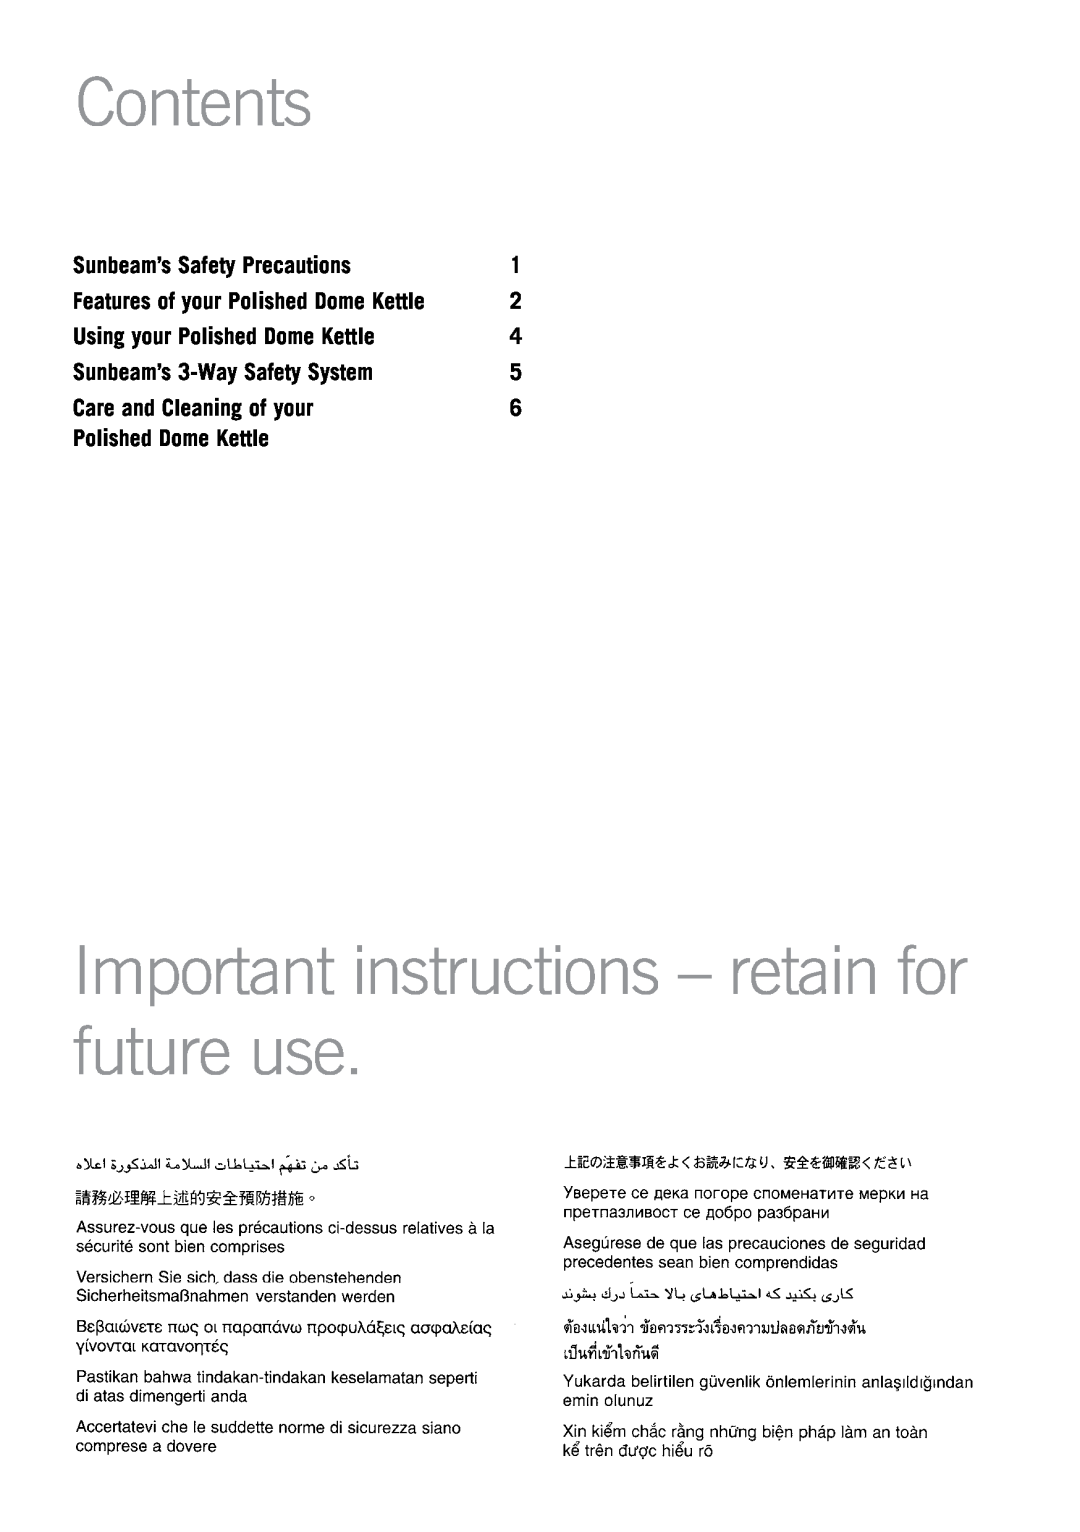 Sunbeam KE7380 manual Contents, Important instructions - retain for future use, Sunbeam’s Safety Precautions 